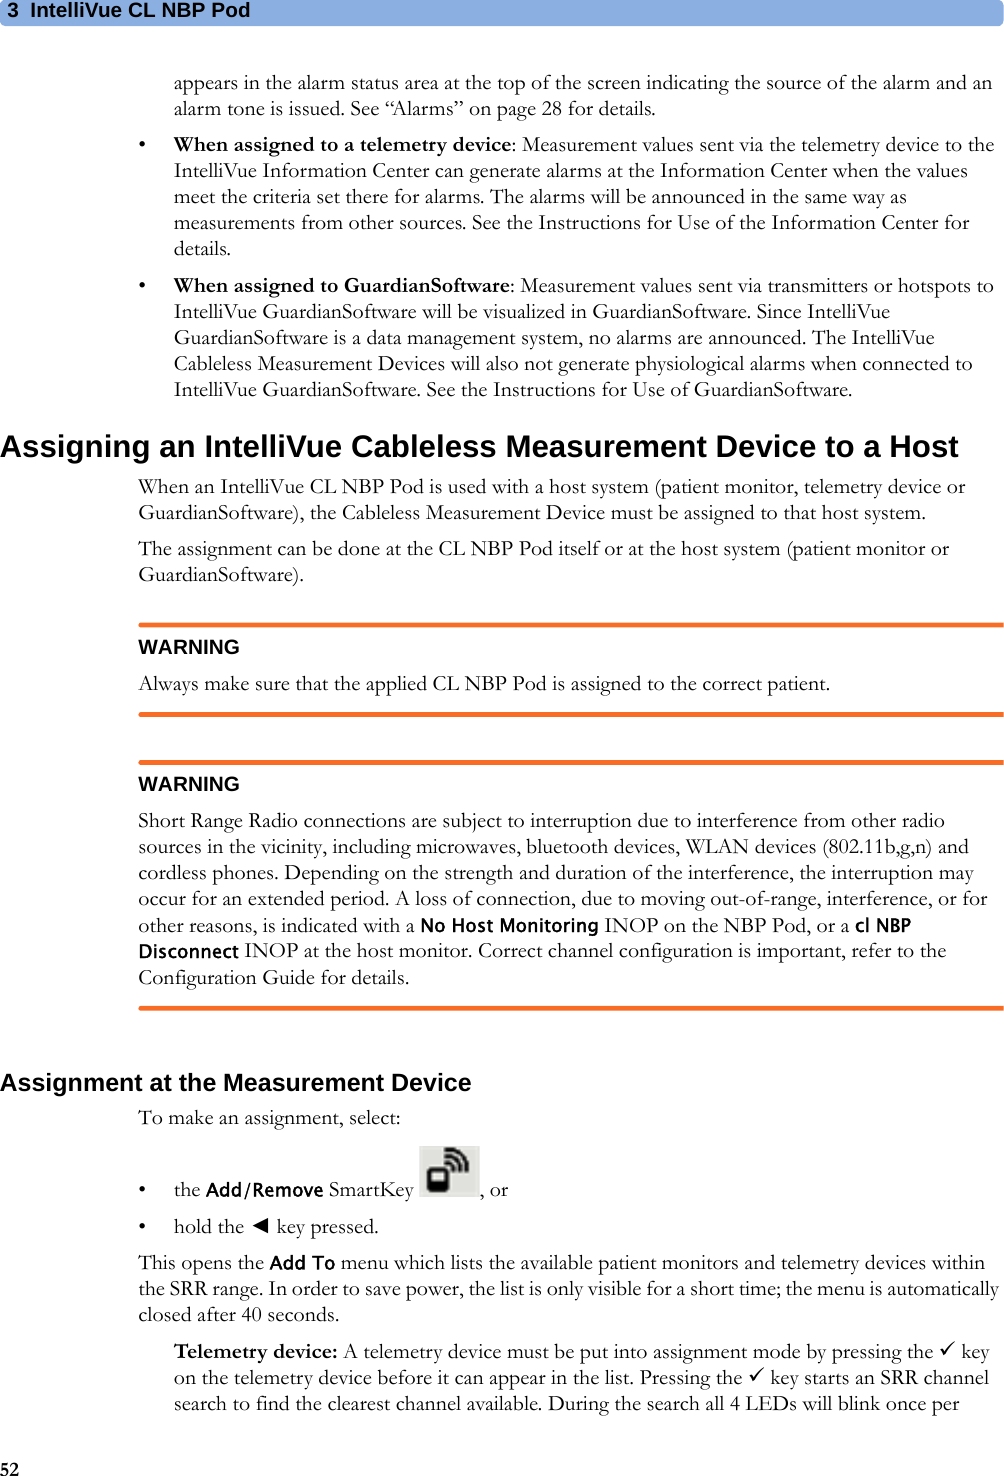 3 IntelliVue CL NBP Pod52appears in the alarm status area at the top of the screen indicating the source of the alarm and an alarm tone is issued. See “Alarms” on page 28 for details.•When assigned to a telemetry device: Measurement values sent via the telemetry device to the IntelliVue Information Center can generate alarms at the Information Center when the values meet the criteria set there for alarms. The alarms will be announced in the same way as measurements from other sources. See the Instructions for Use of the Information Center for details.•When assigned to GuardianSoftware: Measurement values sent via transmitters or hotspots to IntelliVue GuardianSoftware will be visualized in GuardianSoftware. Since IntelliVue GuardianSoftware is a data management system, no alarms are announced. The IntelliVue Cableless Measurement Devices will also not generate physiological alarms when connected to IntelliVue GuardianSoftware. See the Instructions for Use of GuardianSoftware.Assigning an IntelliVue Cableless Measurement Device to a HostWhen an IntelliVue CL NBP Pod is used with a host system (patient monitor, telemetry device or GuardianSoftware), the Cableless Measurement Device must be assigned to that host system.The assignment can be done at the CL NBP Pod itself or at the host system (patient monitor or GuardianSoftware).WARNINGAlways make sure that the applied CL NBP Pod is assigned to the correct patient.WARNINGShort Range Radio connections are subject to interruption due to interference from other radio sources in the vicinity, including microwaves, bluetooth devices, WLAN devices (802.11b,g,n) and cordless phones. Depending on the strength and duration of the interference, the interruption may occur for an extended period. A loss of connection, due to moving out-of-range, interference, or for other reasons, is indicated with a No Host Monitoring INOP on the NBP Pod, or a cl NBP Disconnect INOP at the host monitor. Correct channel configuration is important, refer to the Configuration Guide for details.Assignment at the Measurement DeviceTo make an assignment, select:•the Add/Remove SmartKey  , or• hold the ◄key pressed.This opens the Add To menu which lists the available patient monitors and telemetry devices within the SRR range. In order to save power, the list is only visible for a short time; the menu is automatically closed after 40 seconds.Telemetry device: A telemetry device must be put into assignment mode by pressing the  key on the telemetry device before it can appear in the list. Pressing the  key starts an SRR channel search to find the clearest channel available. During the search all 4 LEDs will blink once per 